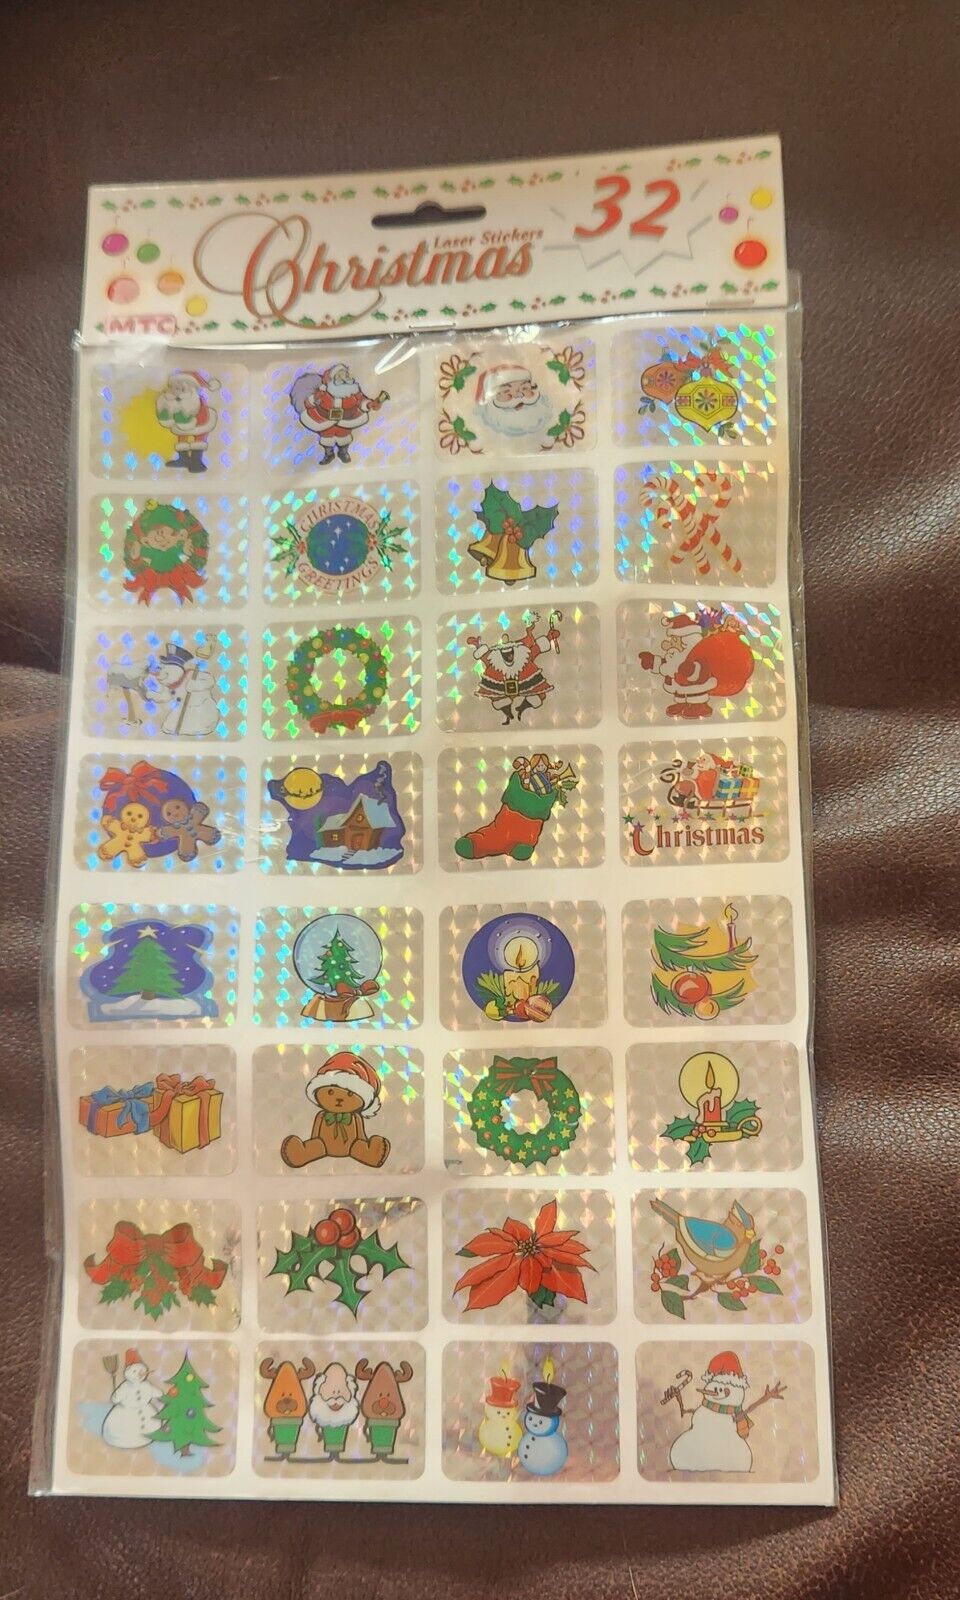 Vintage prismatic laser stickers. Christmas/Seasonal themed. 32 total. New.